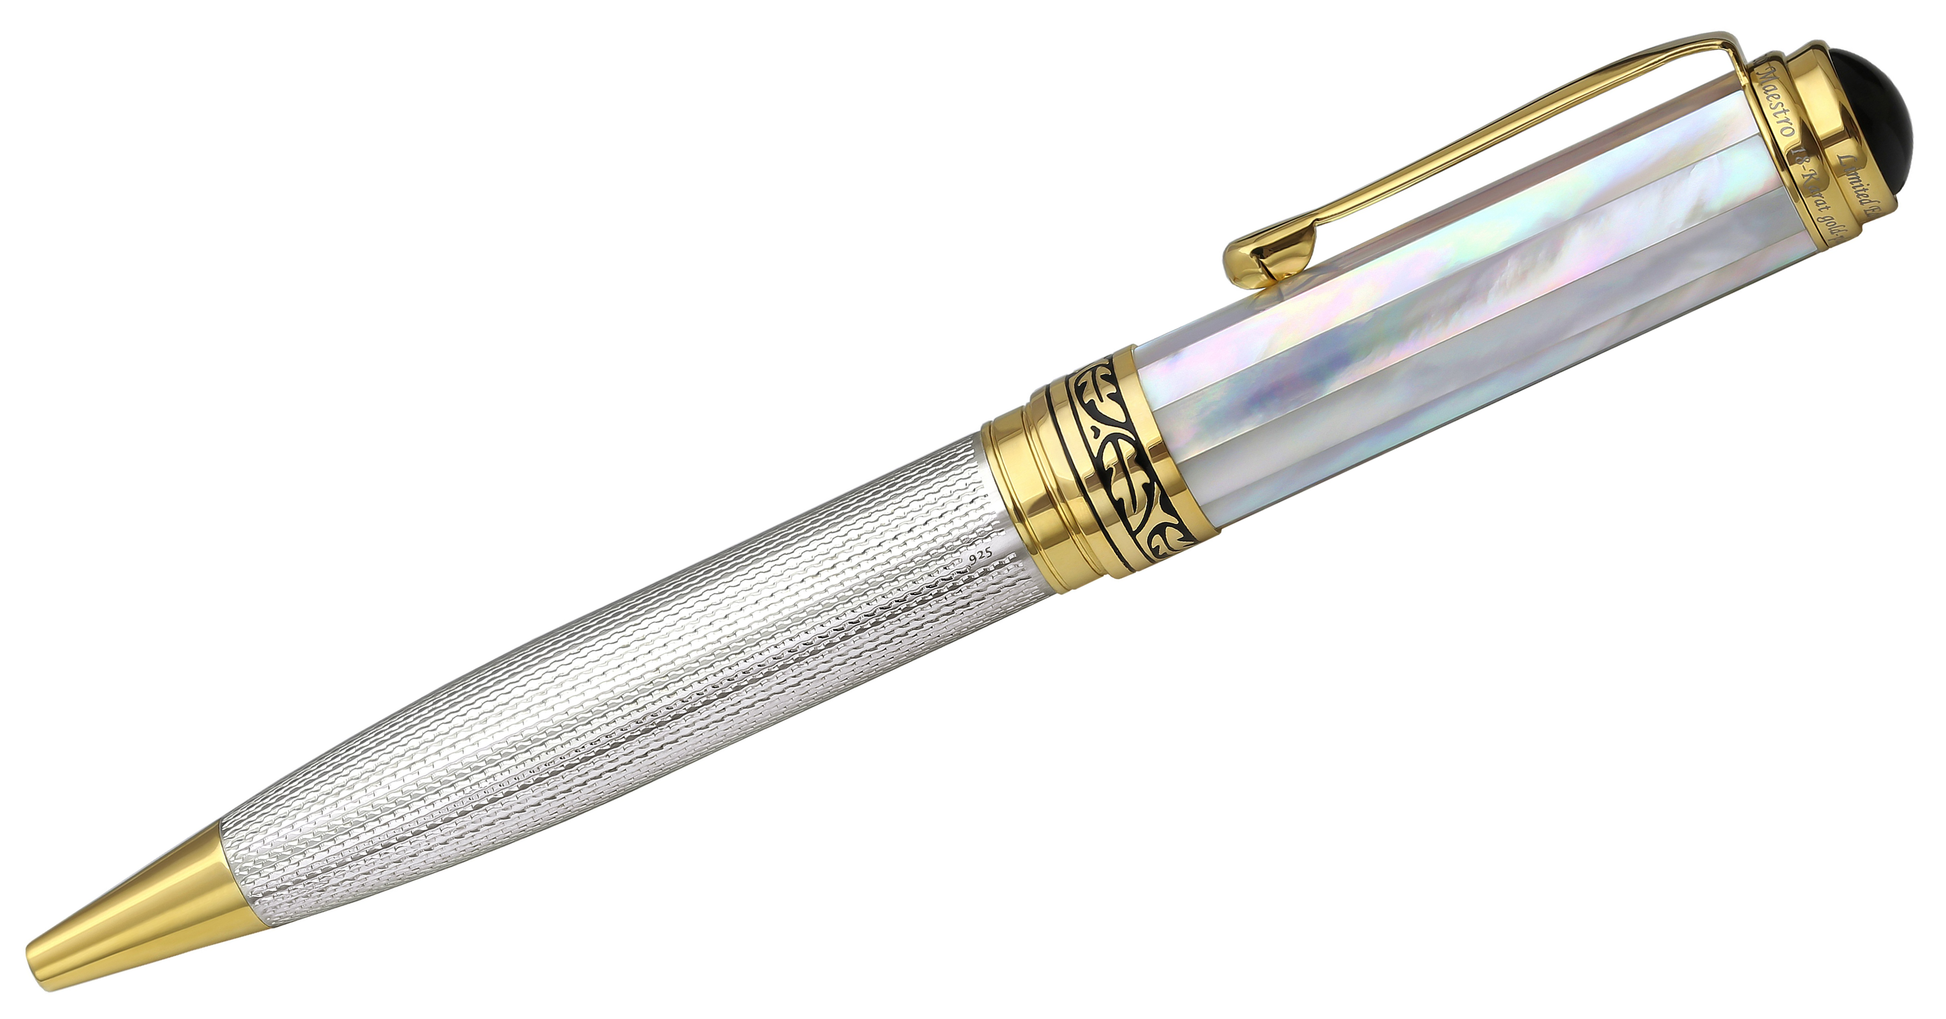 Side view of the Maestro White MOP B ballpoint pen